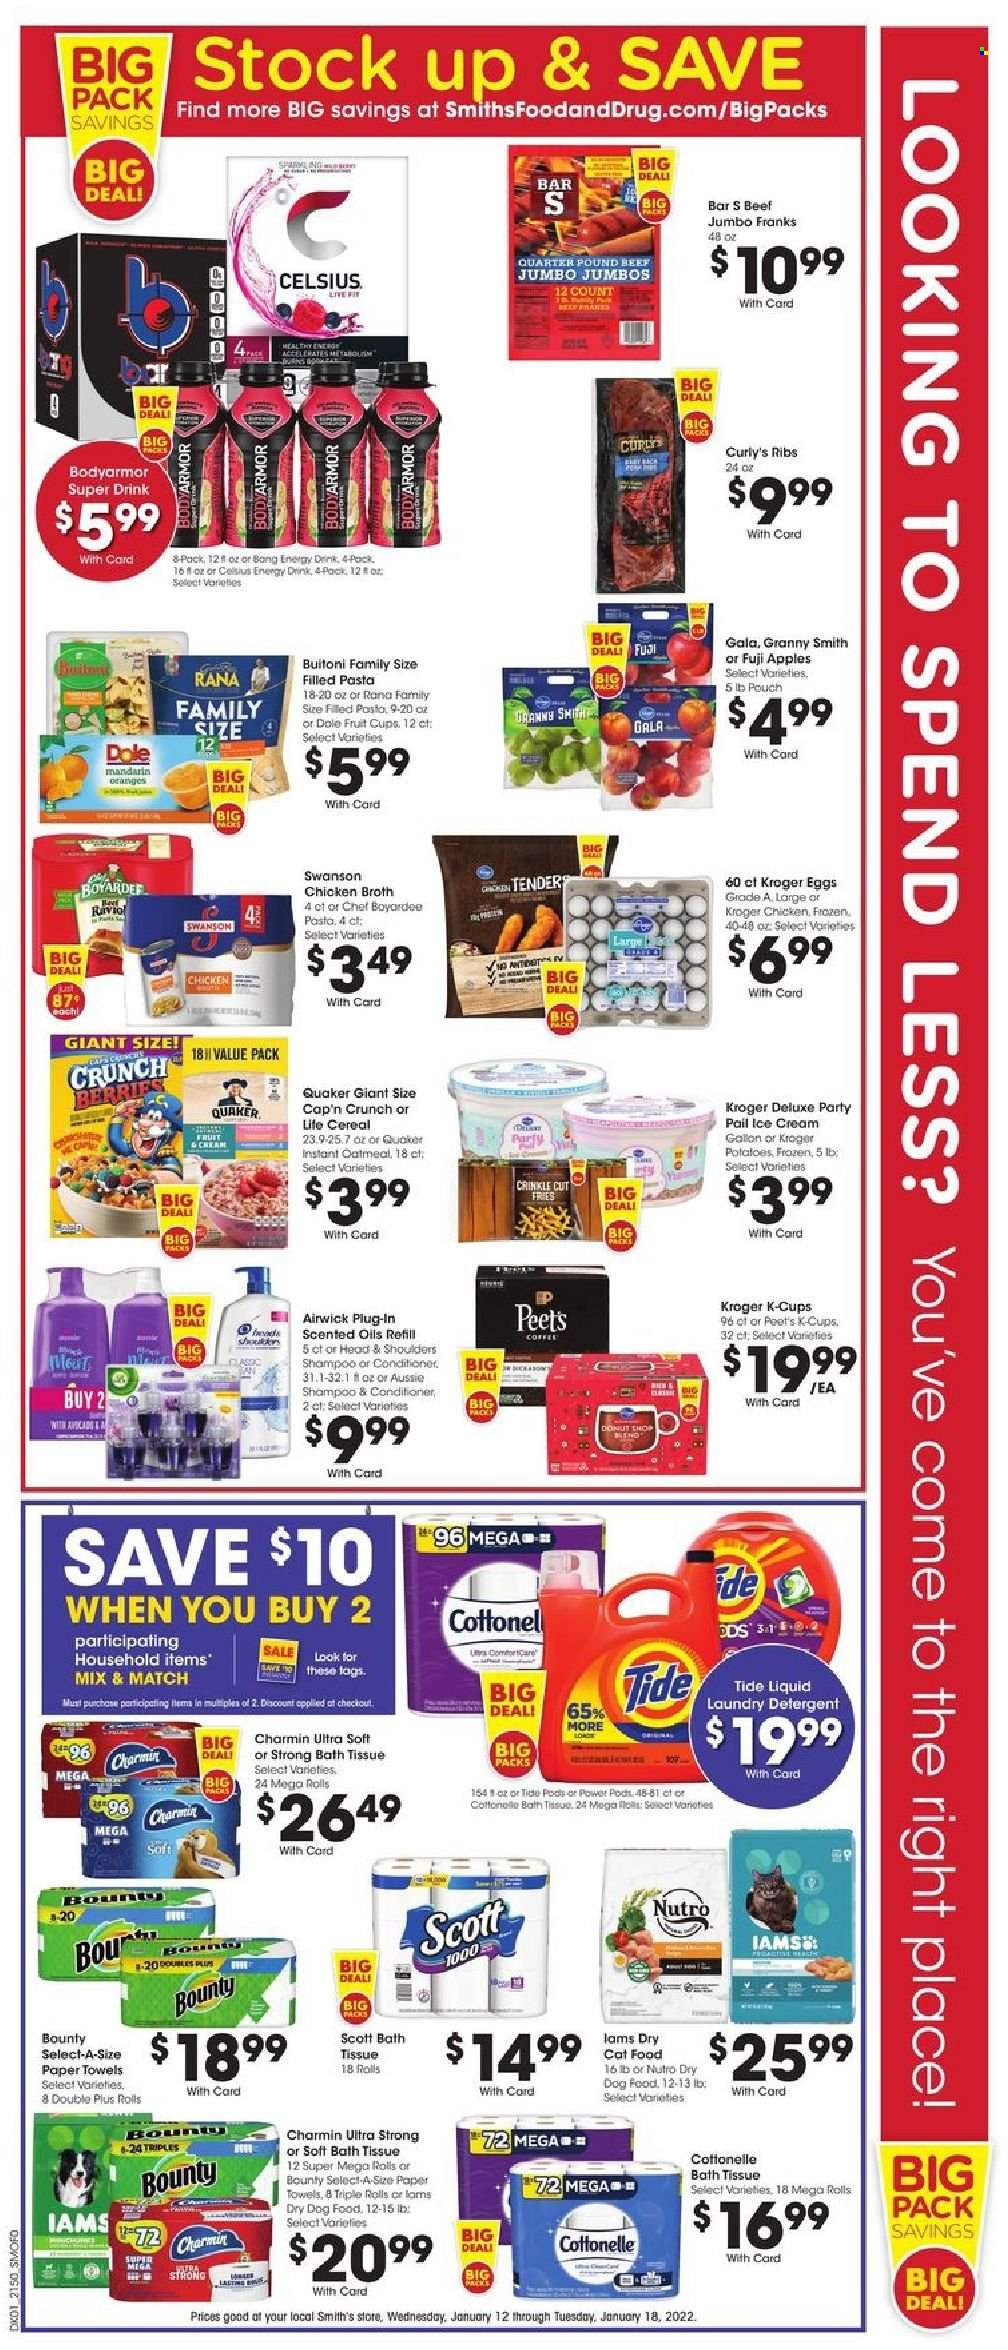 thumbnail - Smith's Flyer - 01/12/2022 - 01/18/2022 - Sales products - fruit cup, potatoes, Dole, apples, Gala, Fuji apple, Granny Smith, pasta, Quaker, Rana, Buitoni, filled pasta, eggs, ice cream, potato fries, Bounty, Smith's, chicken broth, oatmeal, broth, Chef Boyardee, cereals, Cap'n Crunch, energy drink, coffee capsules, K-Cups, bath tissue, Cottonelle, Scott, kitchen towels, paper towels, Charmin, detergent, Tide, laundry detergent, shampoo, Aussie, conditioner, Head & Shoulders, Air Wick, animal food, cat food, dog food, dry dog food, dry cat food, Iams. Page 2.